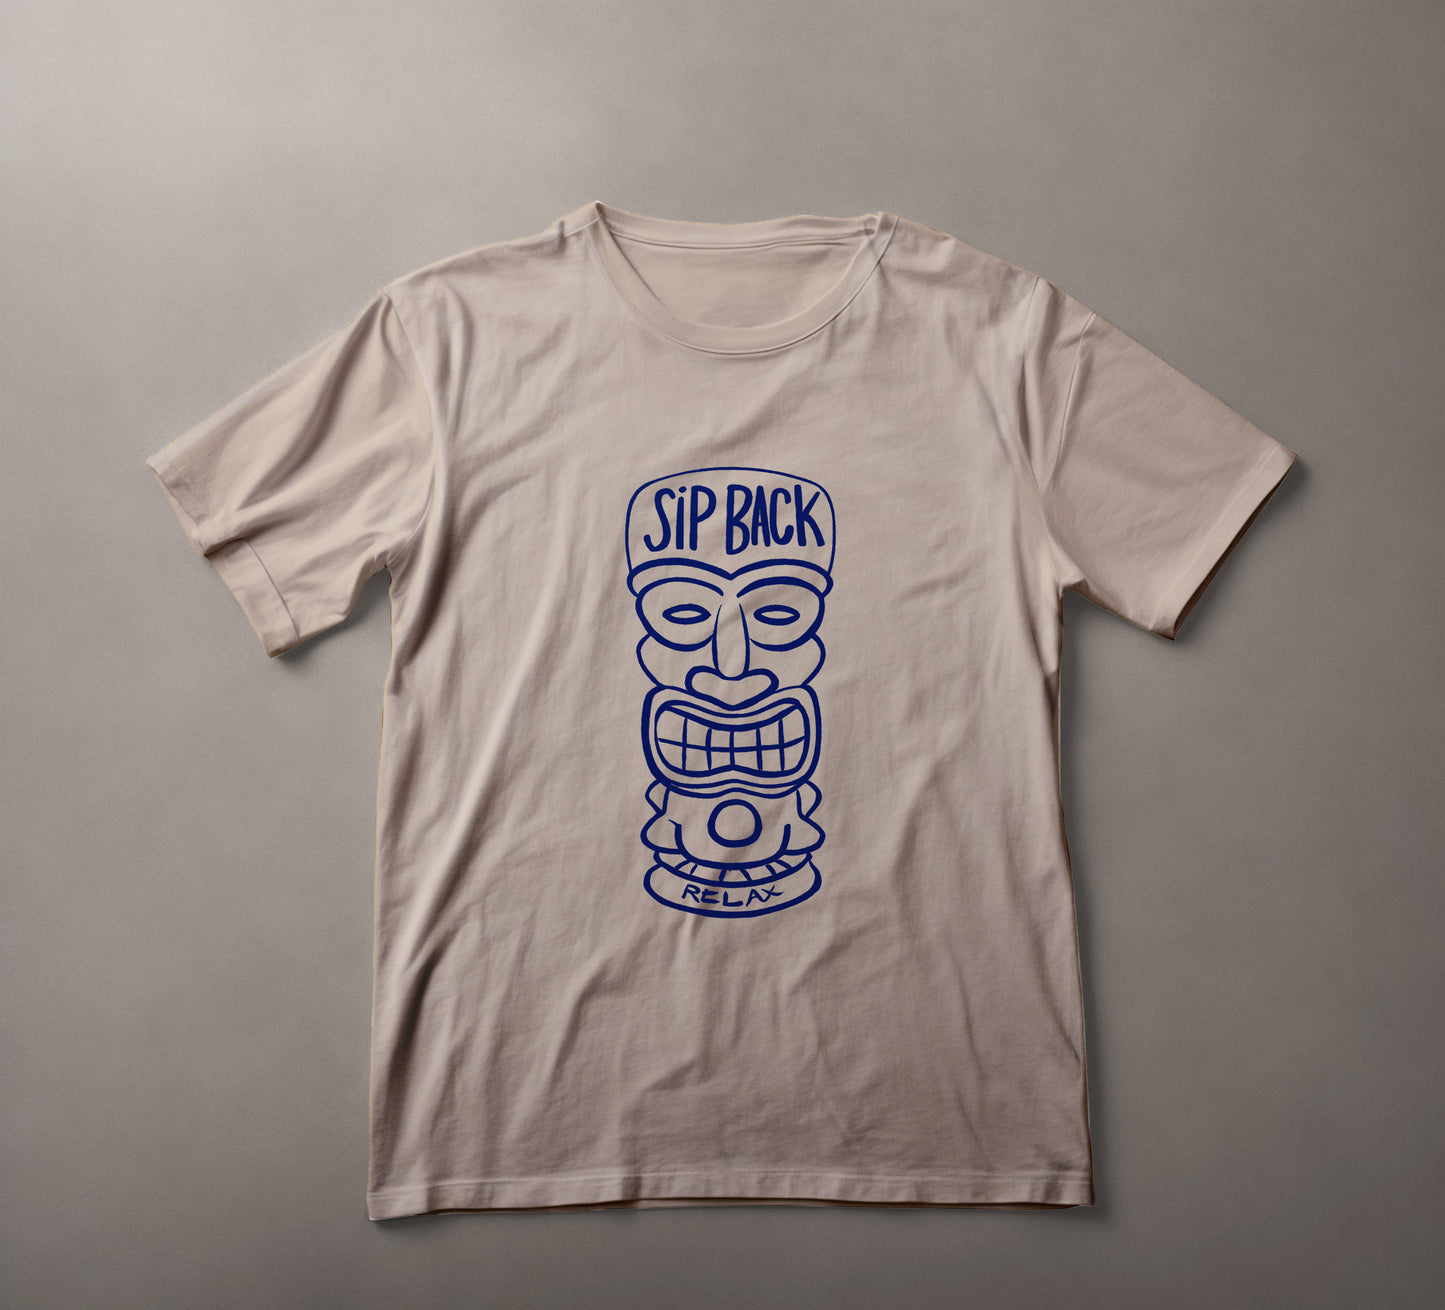 tiki mask t-shirt, relaxed fit tee, beachwear, casual style shirt, tropical themed apparel, vacation clothing, leisurewear, sip back relax, navy blue graphic tee, summer fashion